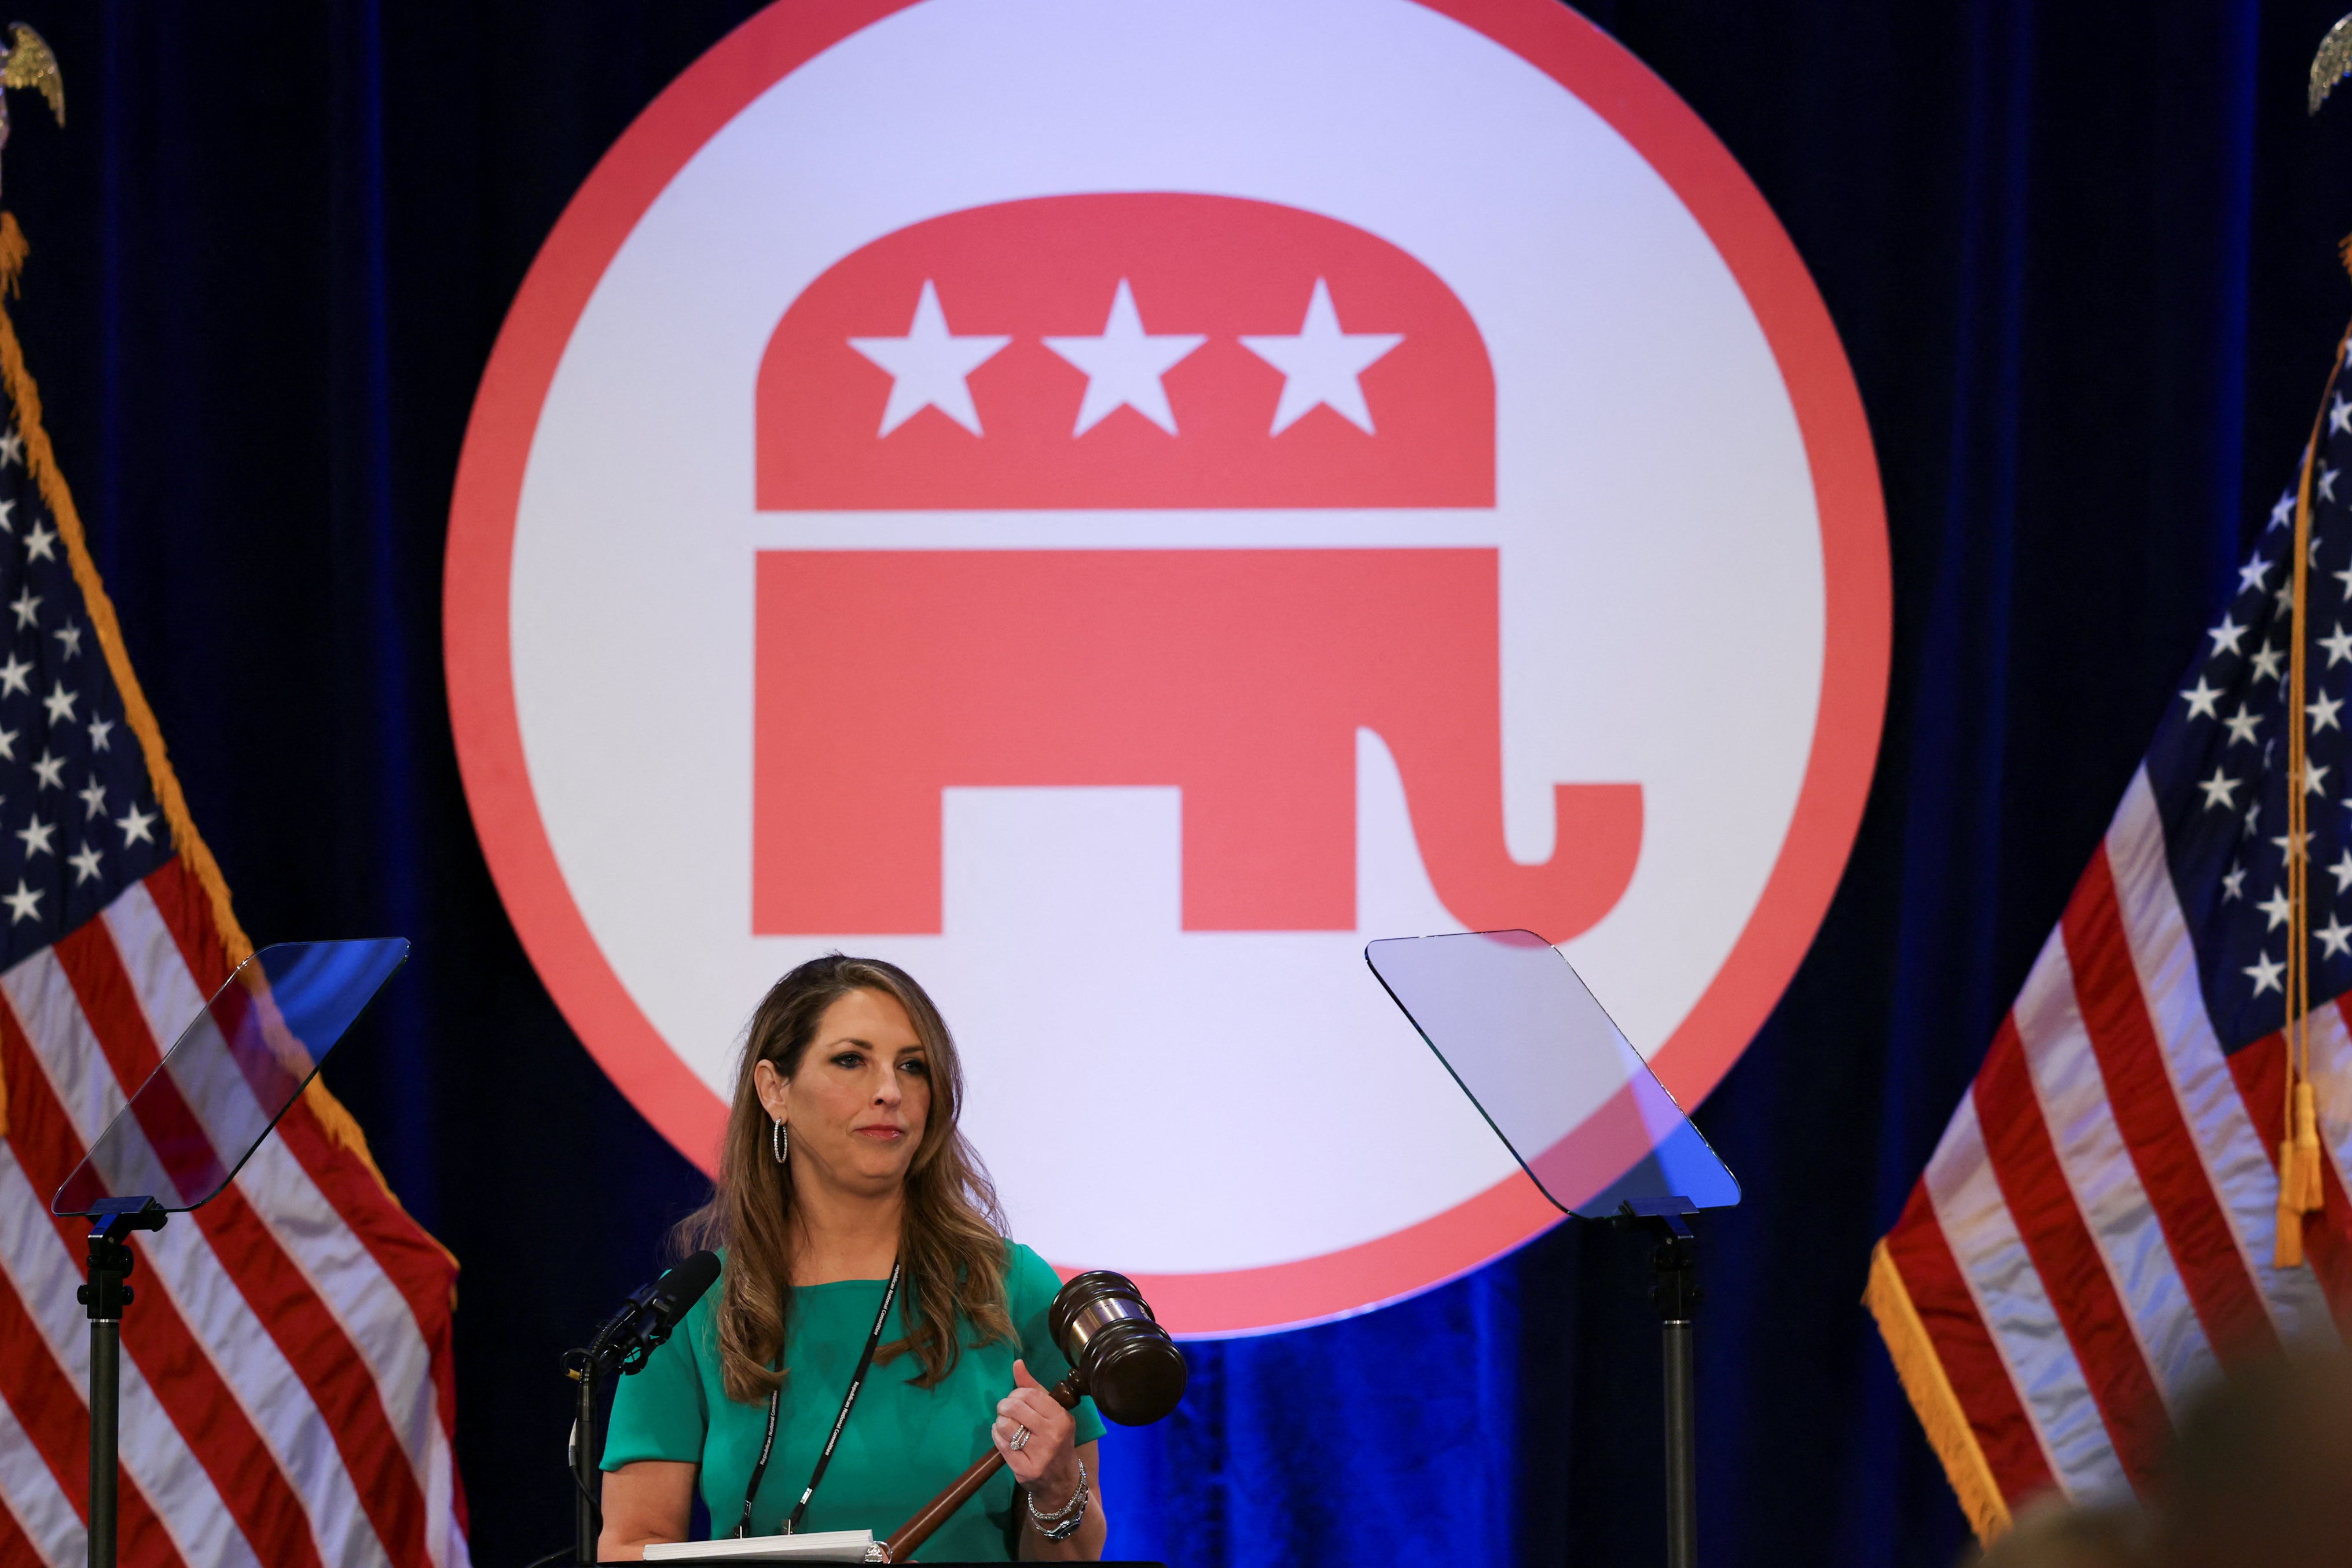 A woman holds a gavel with a large image of the GOP elephant behind her, flanked on either side by American flags.